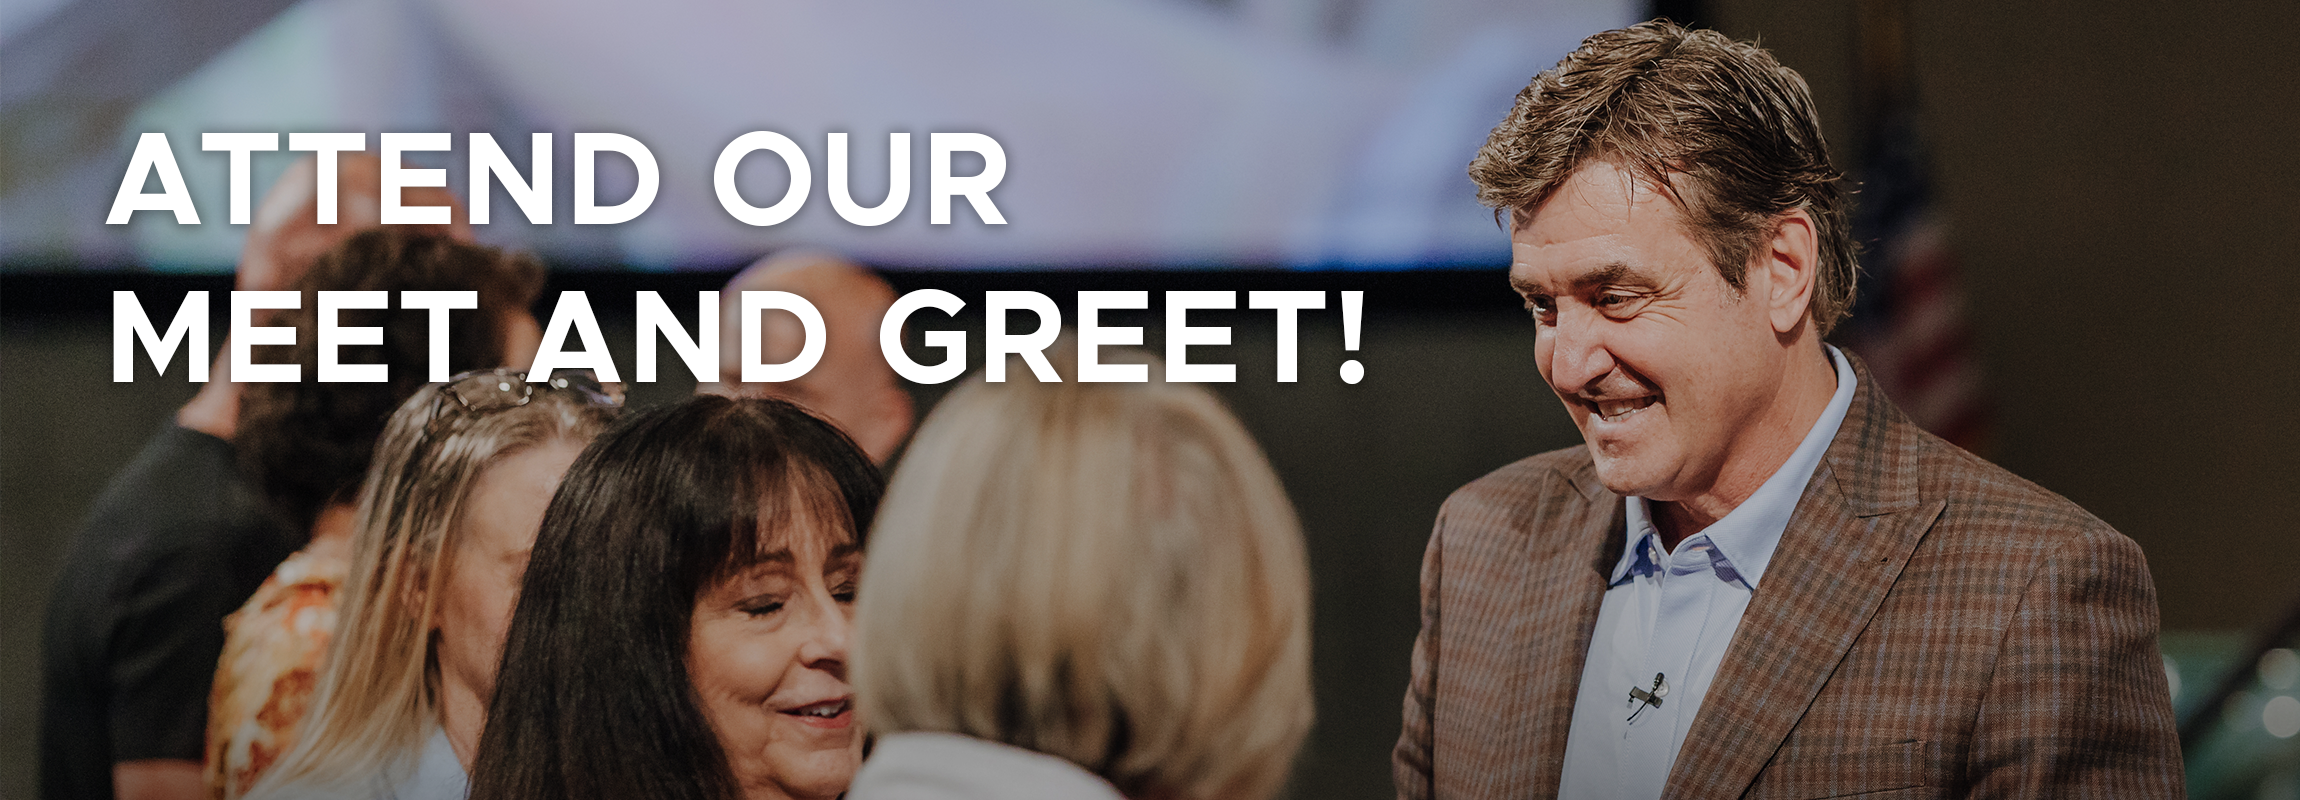 We’re Excited To Meet You!